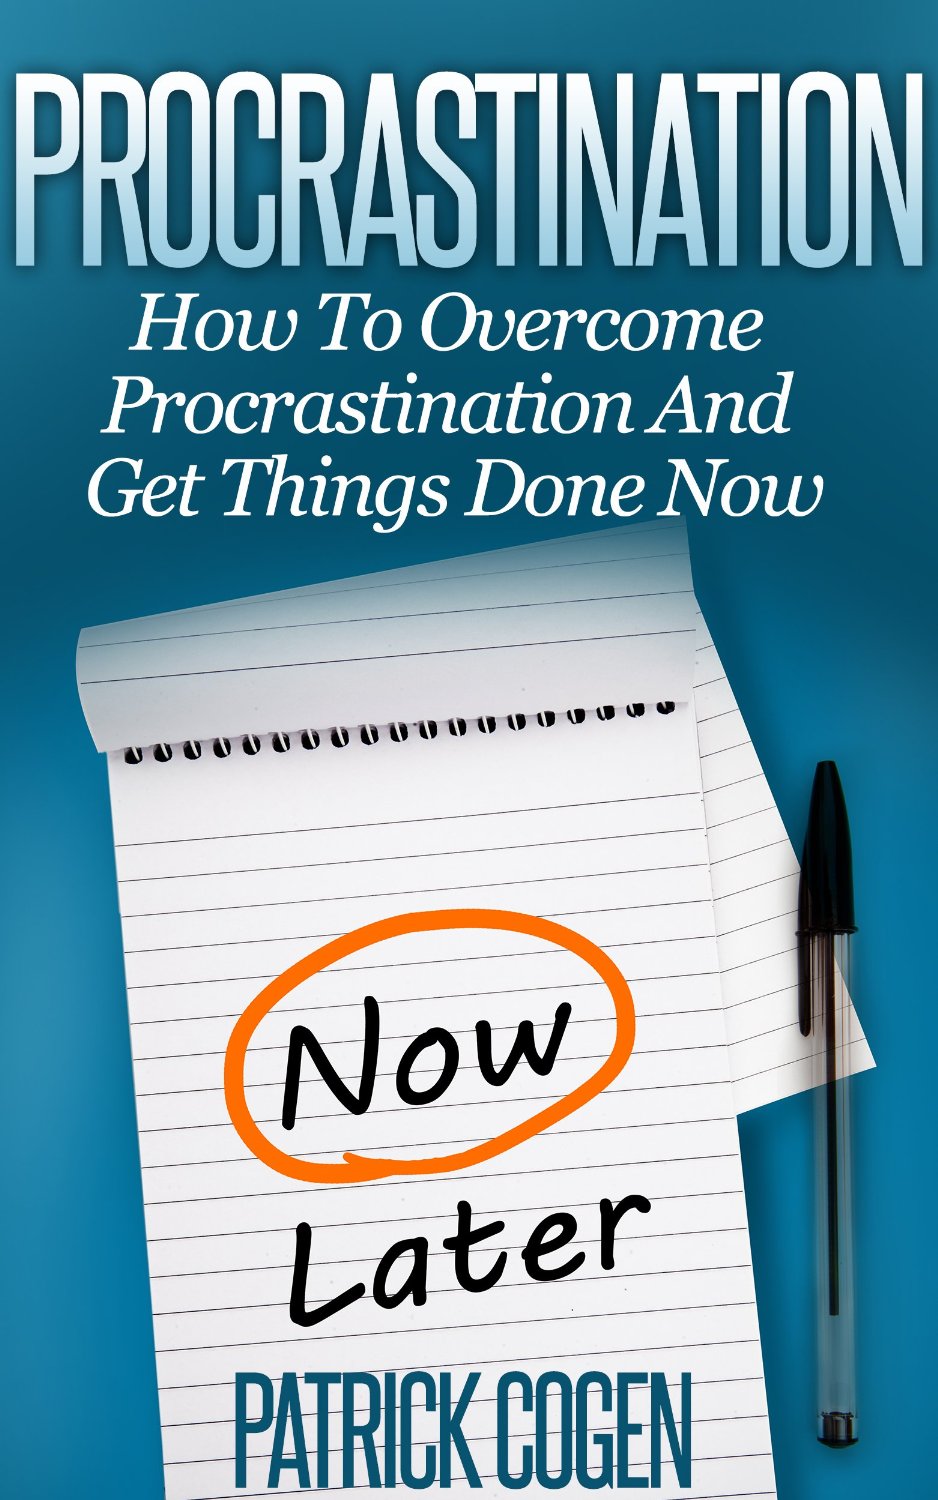 Procrastination – How To Overcome Procrastination And Get Things Done Now by Patrick Cogen